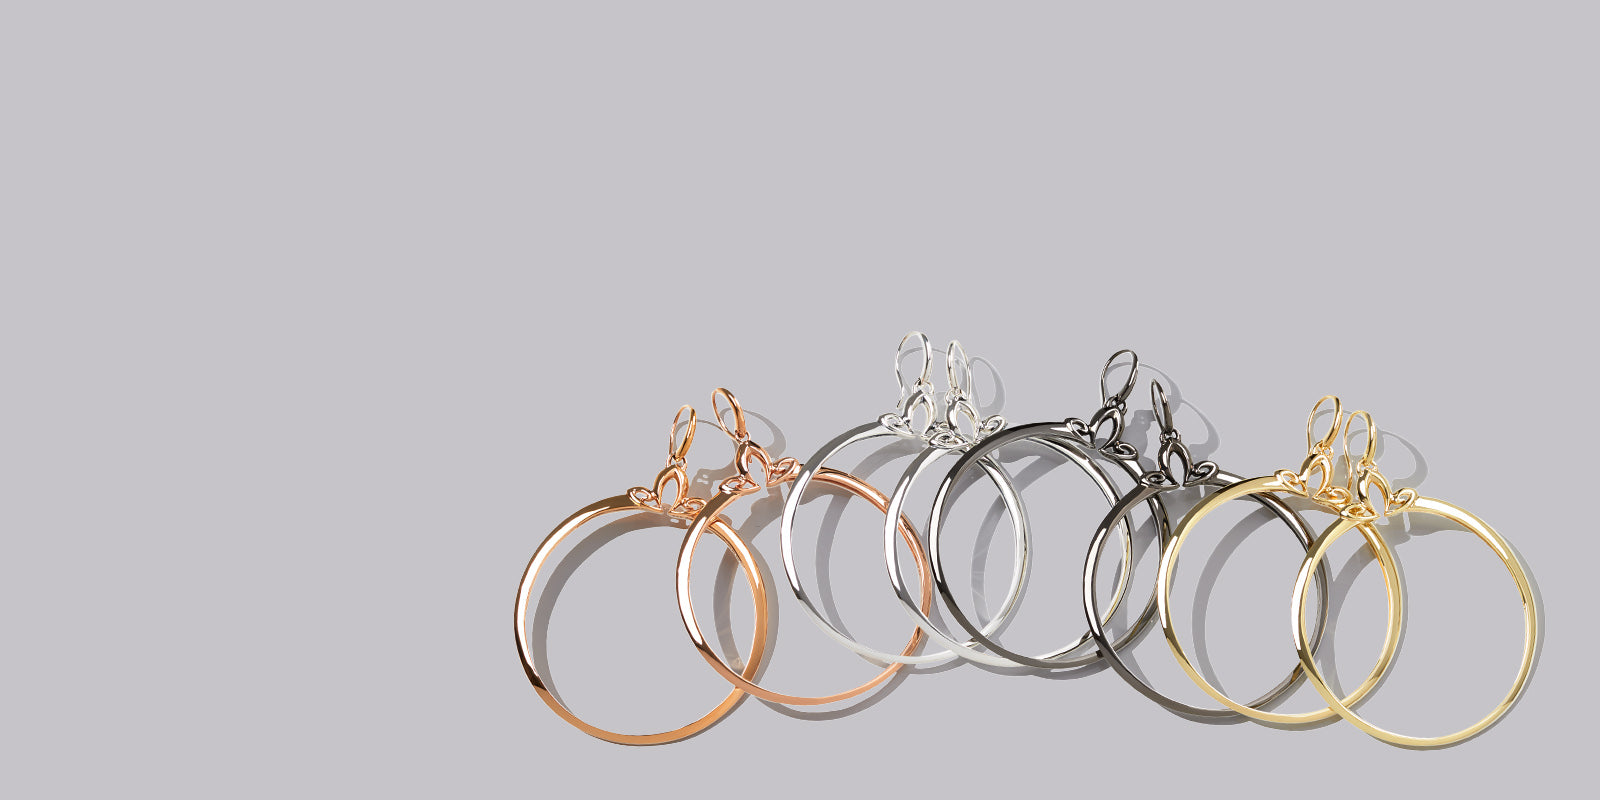 four DOMAIN portrait hoop earrings in The Shades of REALM precious metal colorways